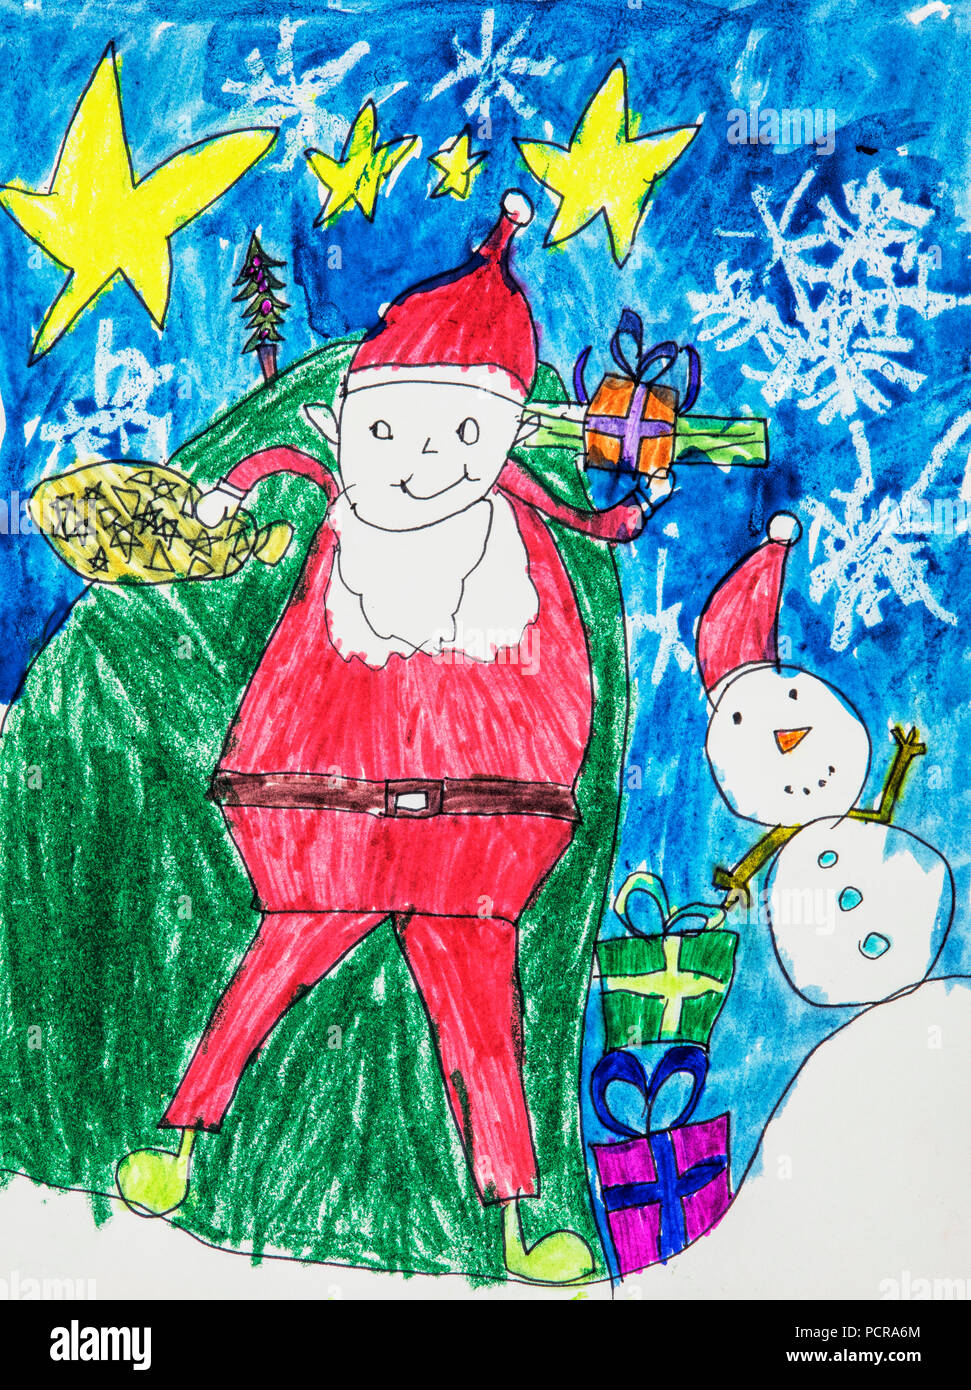 Christmas Drawing for Kids and Students